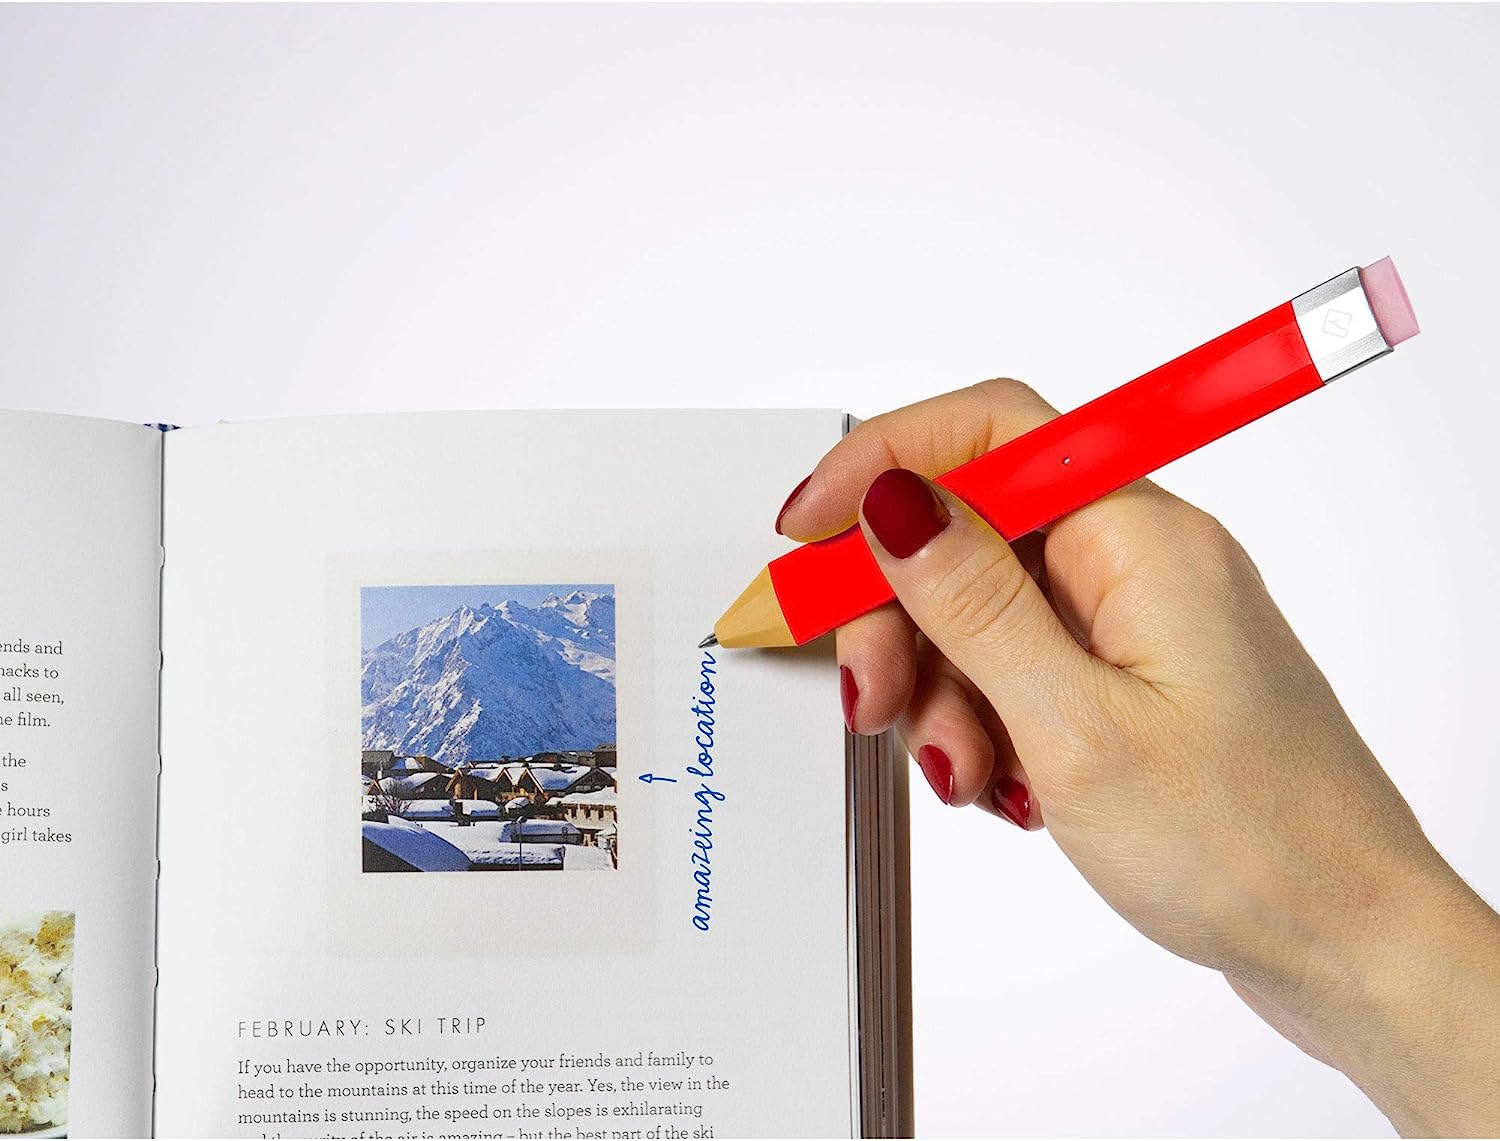 Pen Bookmark Red with Refills - The English Bookshop Kuwait